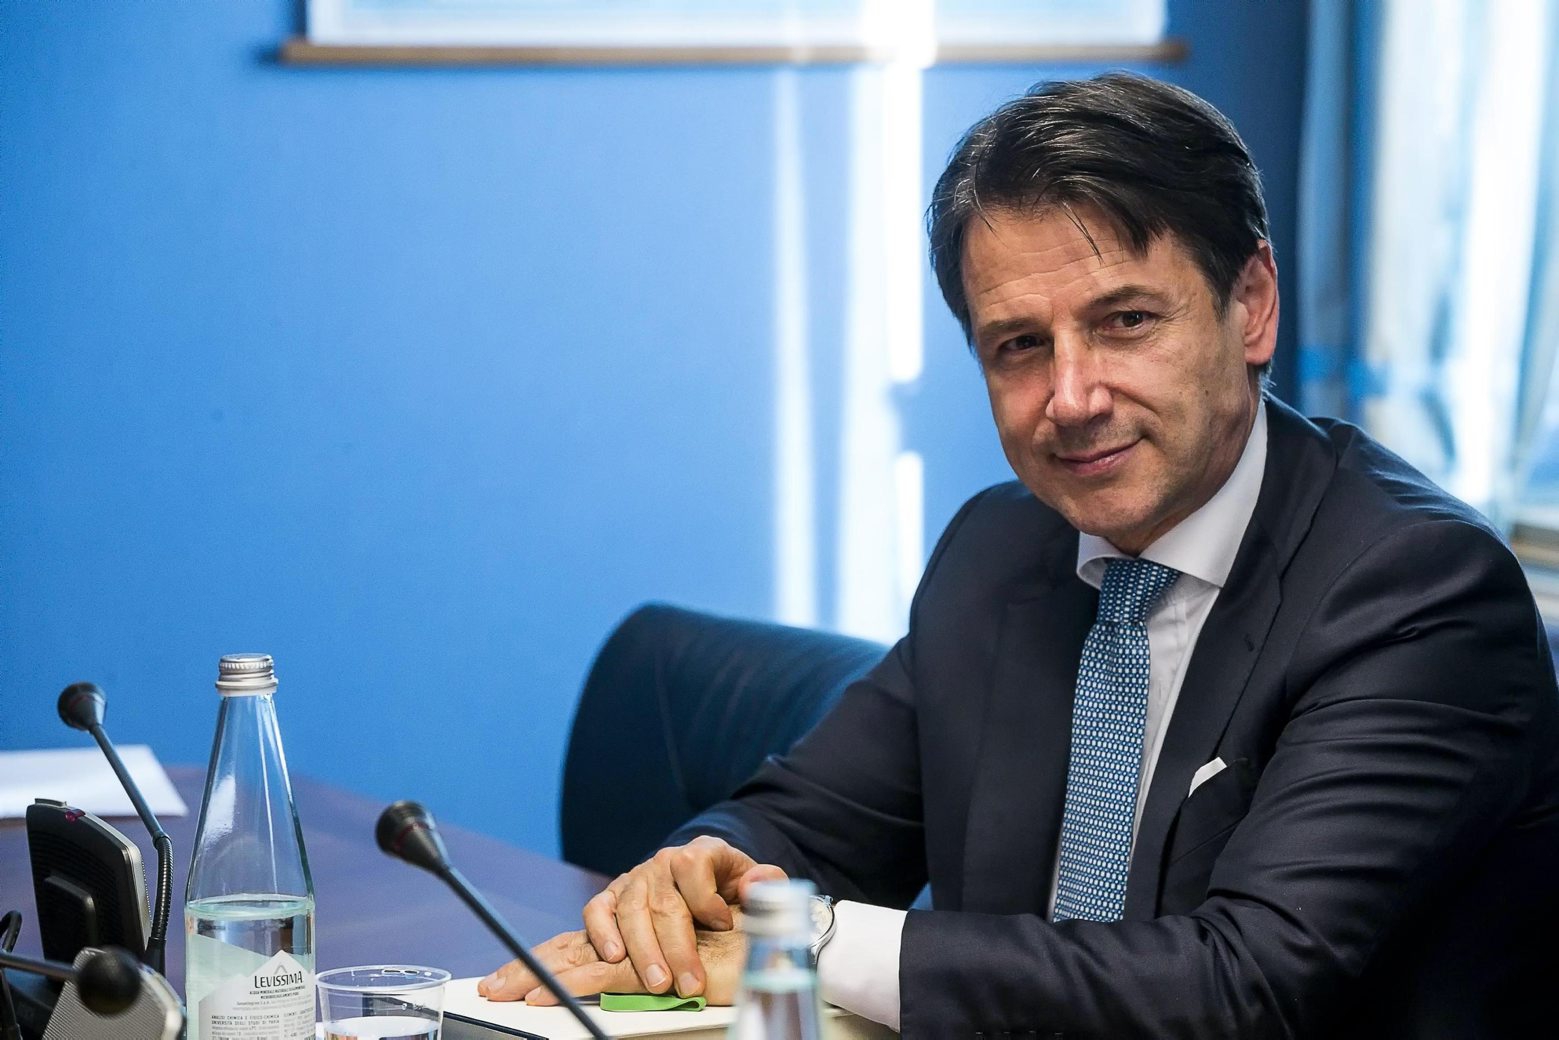 Italian Premier Giuseppe Conte sits before testifying behind closed doors to COPASIR (Italian parliamentary intelligence committee) about a meeting between United States Attorney General William Barr and Italian intelligence, in Rome, Wednesday, Oct. 23, 2019. Media reports have indicated that Conte authorized the contacts -- one in August and one in September -- in violation of protocol. (Angelo Carconi/ANSA via AP) Italy US Intellligence